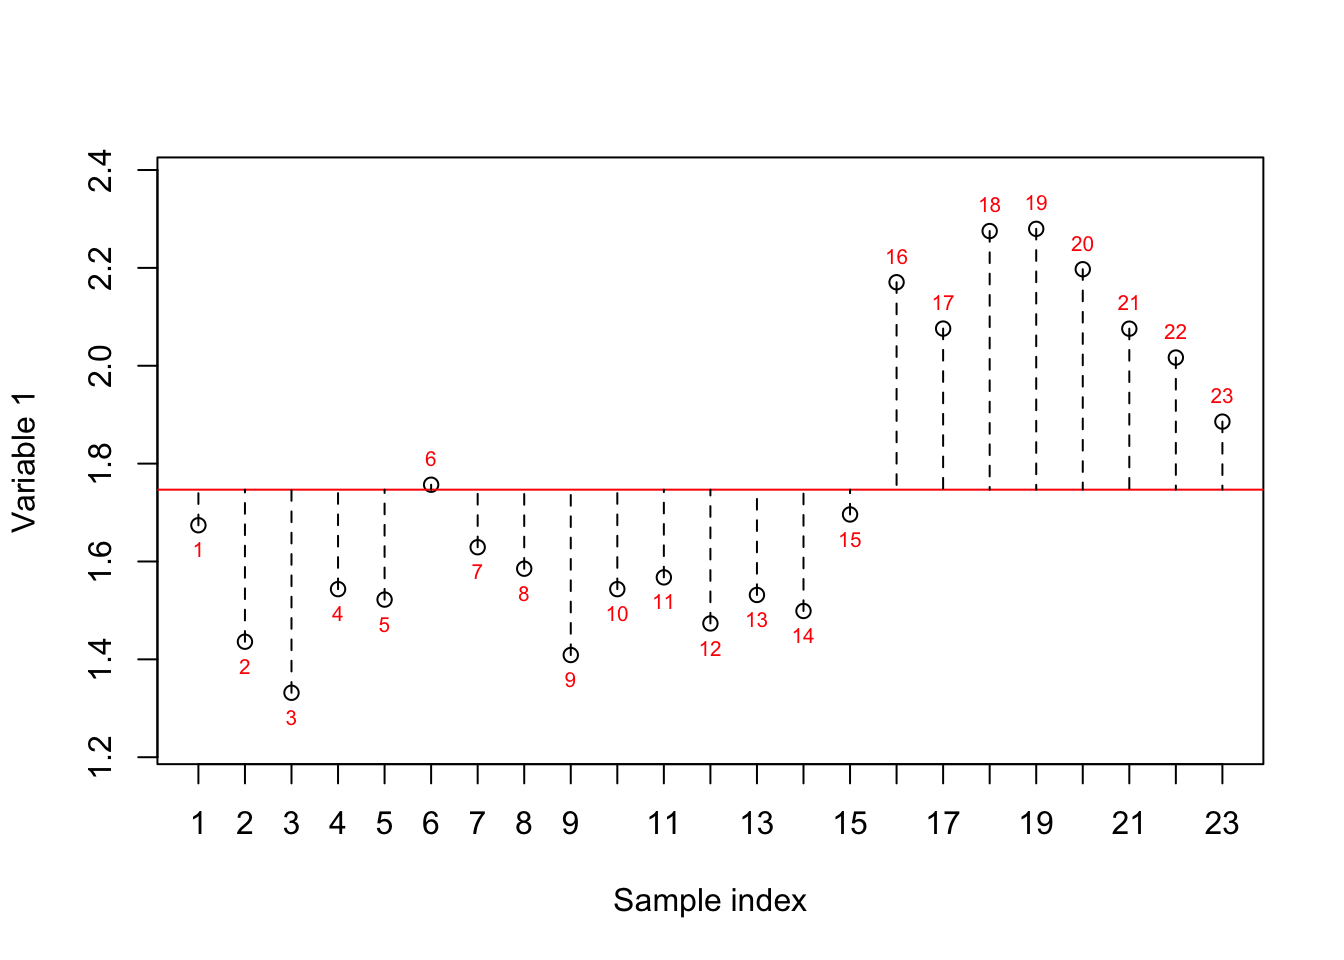 Here, we select one variable (a gene) and show how the data is spread around the mean. The red numbers show the index of each sample. The red line shows the mean and the dashed lines show the distance between each observation and mean